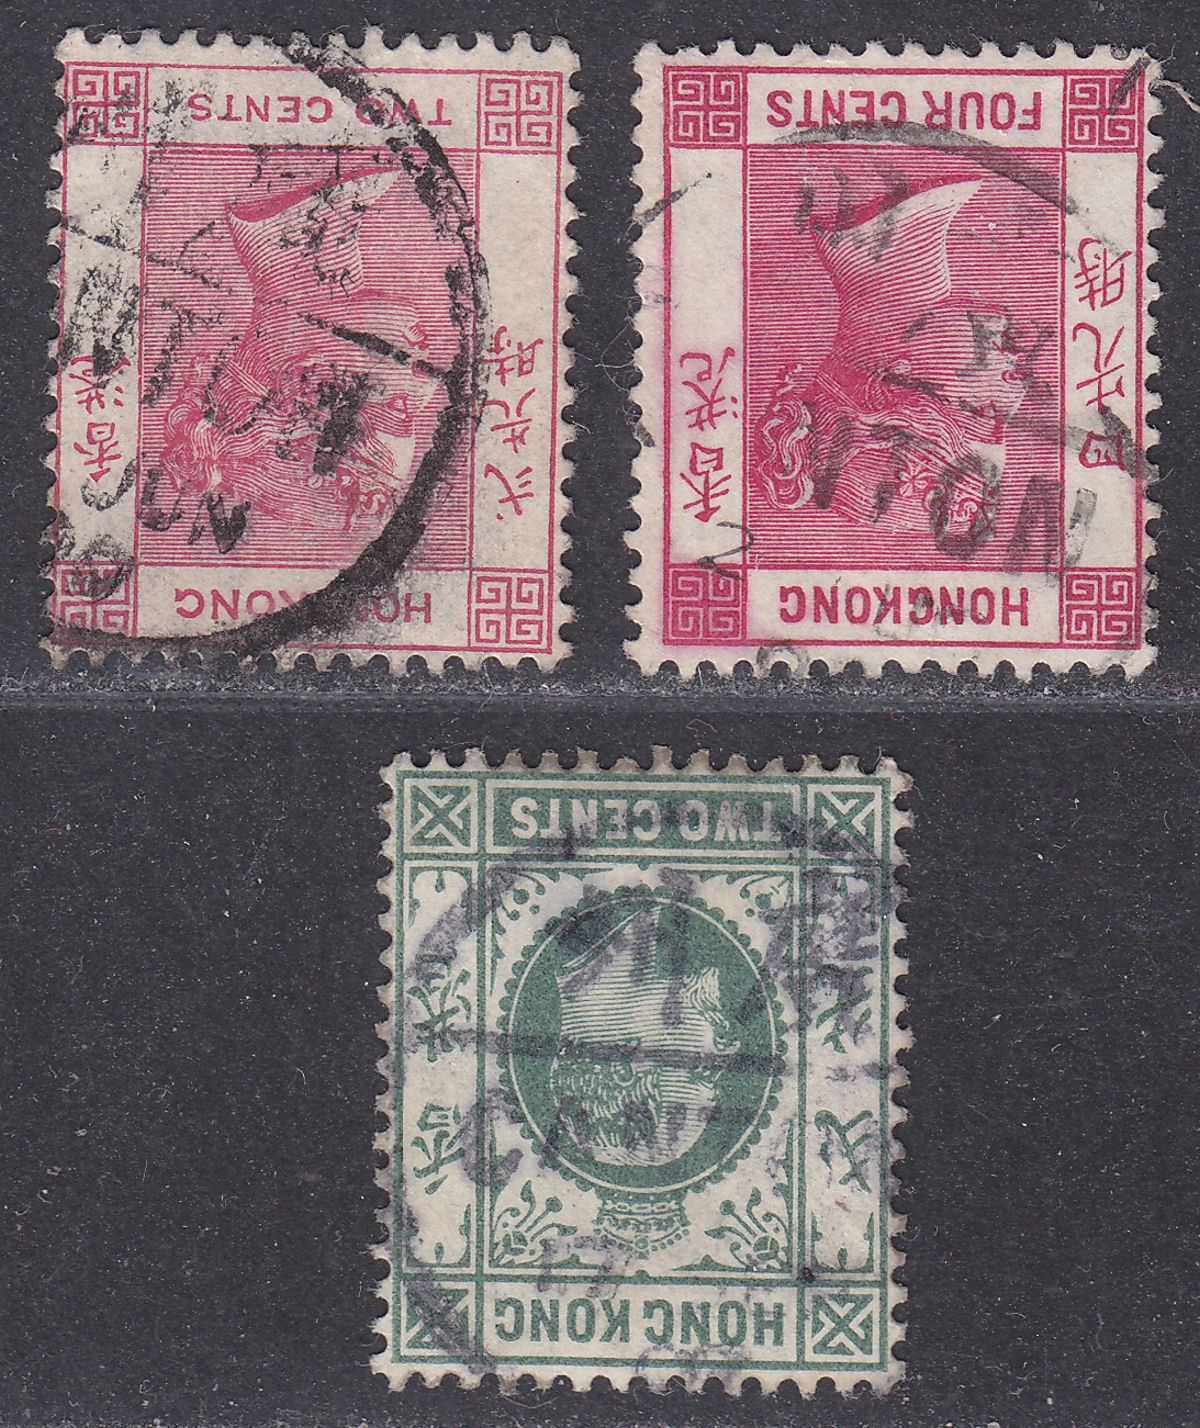 Hong Kong QV 2c, 4c, KEVIII 2c Used with part CANTON Chinese Bilingual Postmarks